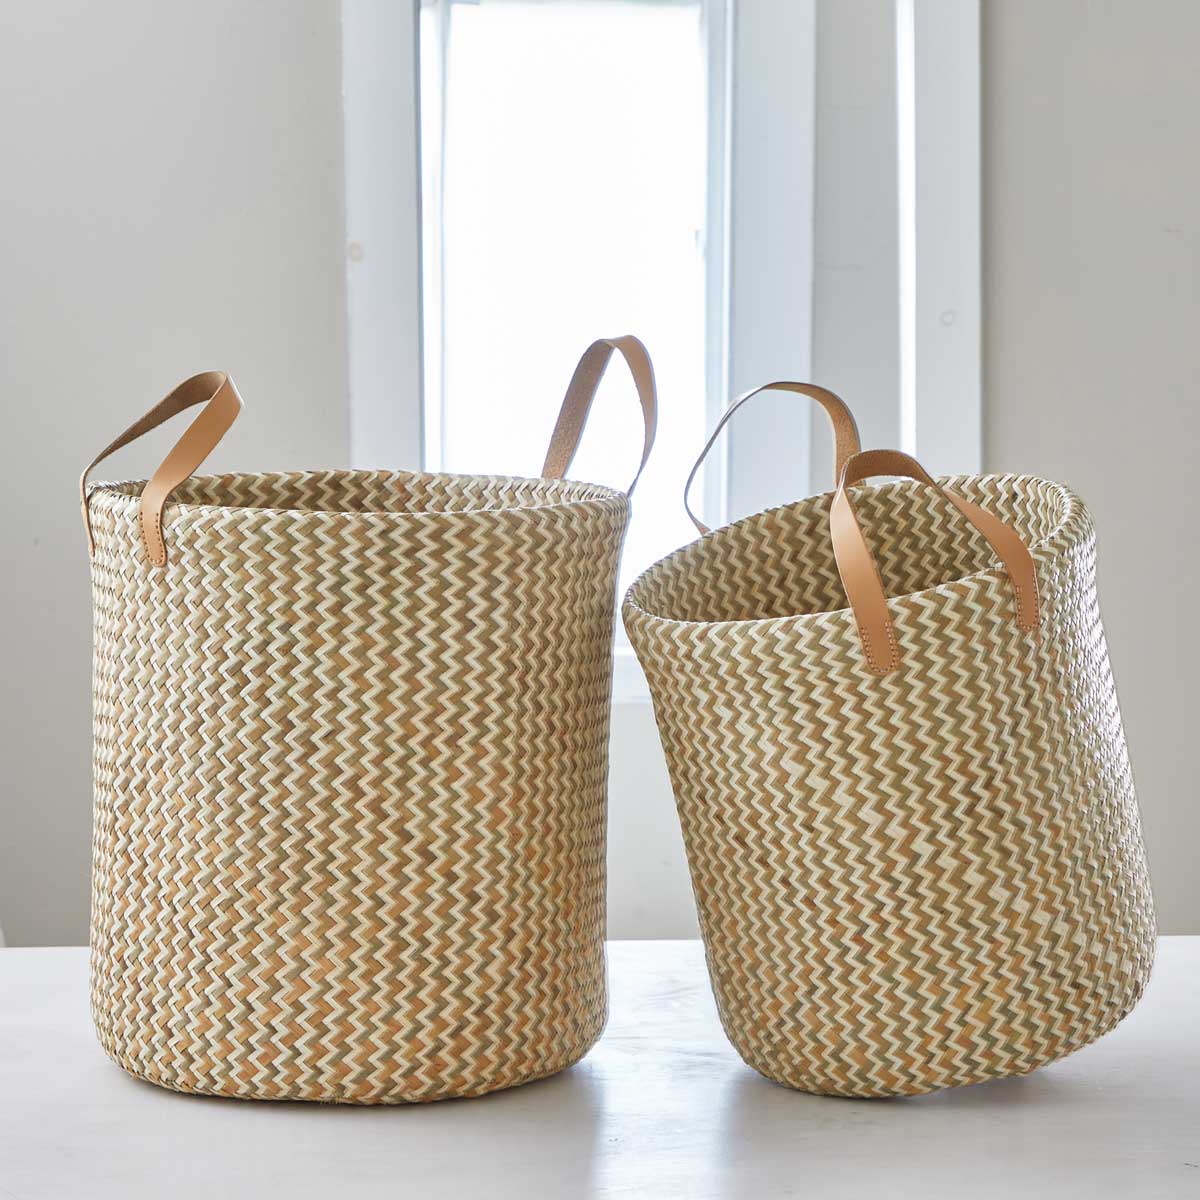 HANDWOVEN BASKETS with LEATHER HANDLES